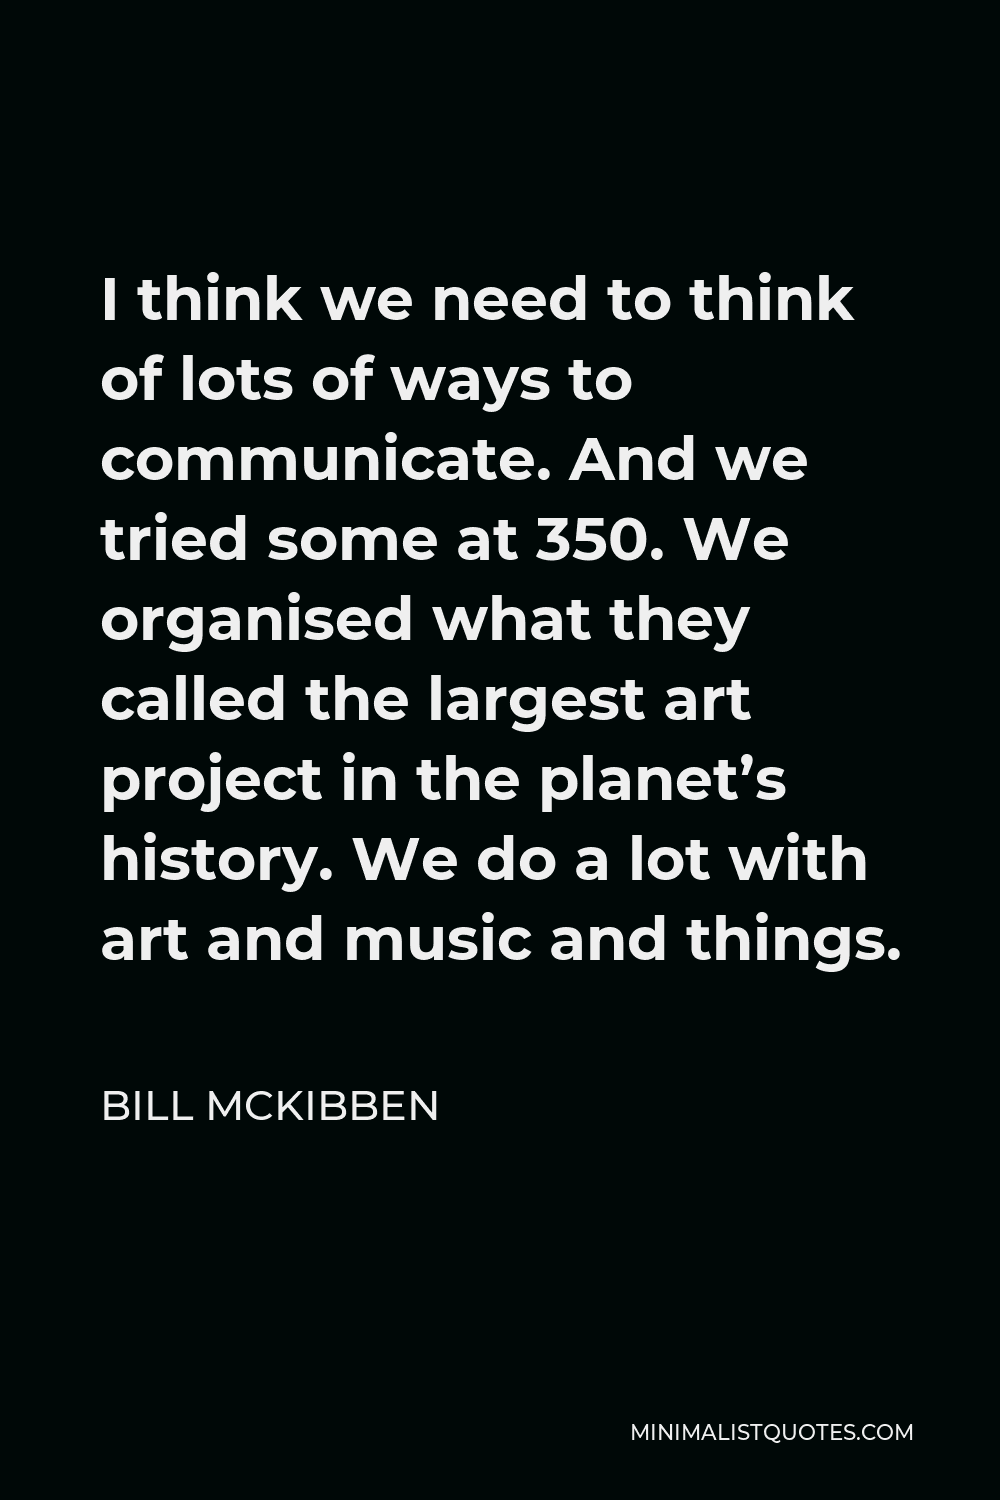 Bill McKibben Quote - I think we need to think of lots of ways to communicate. And we tried some at 350. We organised what they called the largest art project in the planet’s history. We do a lot with art and music and things.